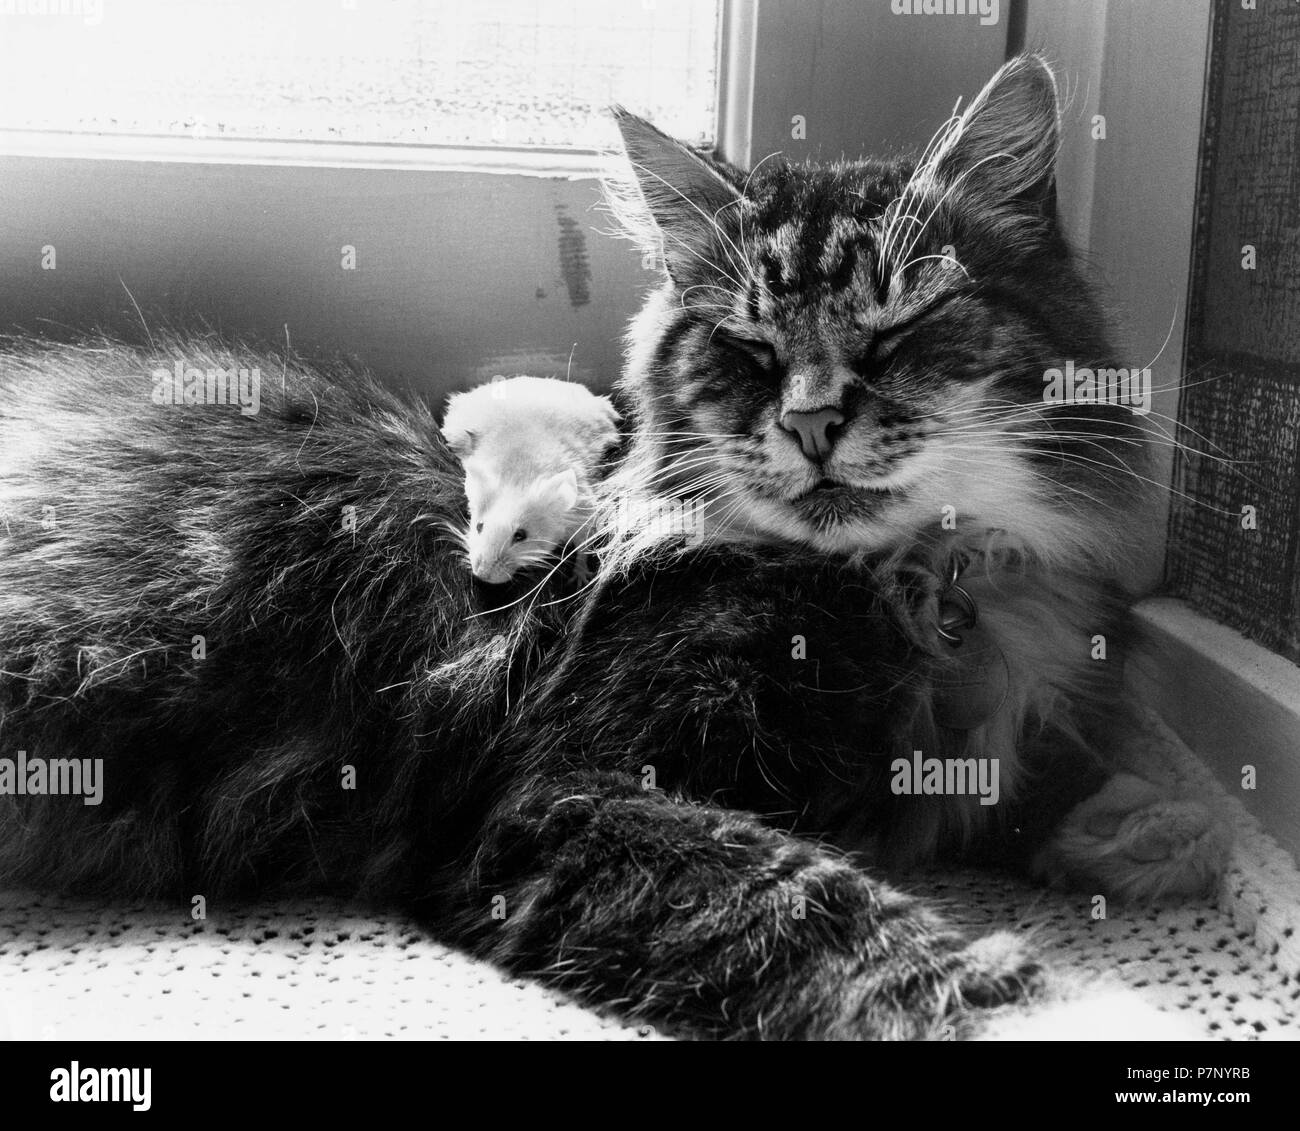 https://c8.alamy.com/comp/P7NYRB/cat-cuddling-with-mouse-england-great-britain-P7NYRB.jpg